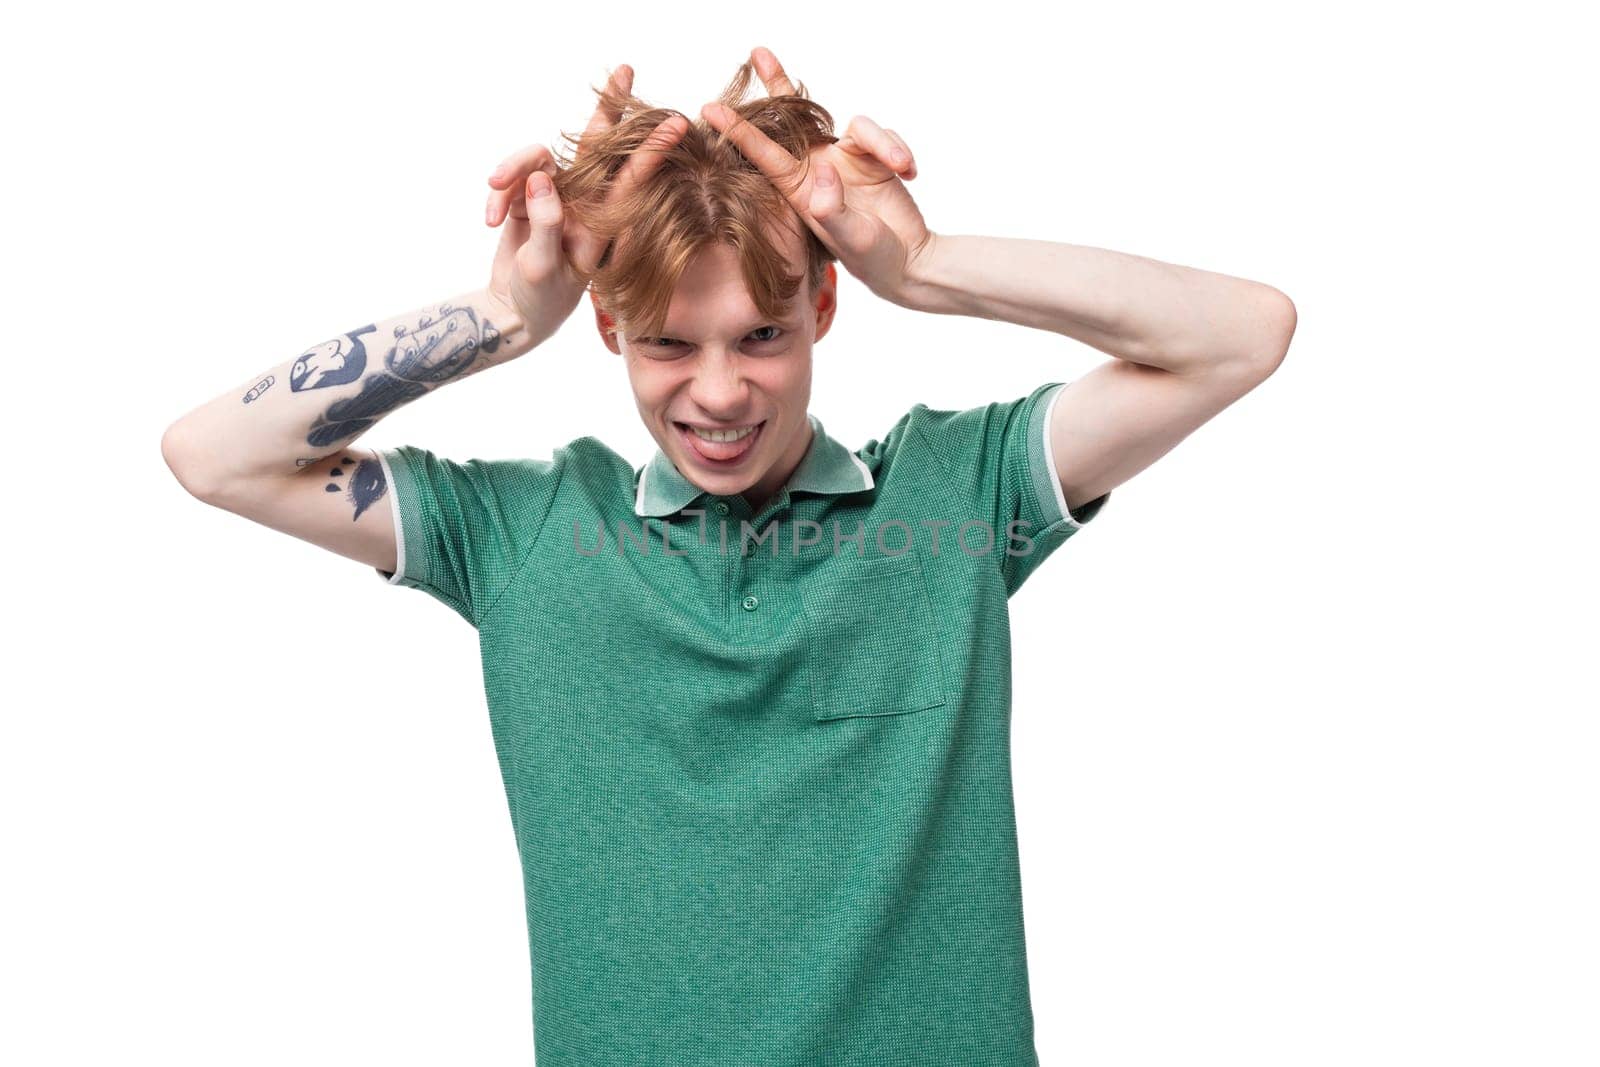 young emotional caucasian man with red hair dressed in a green t-shirt shows his coolness against the background with copy space.